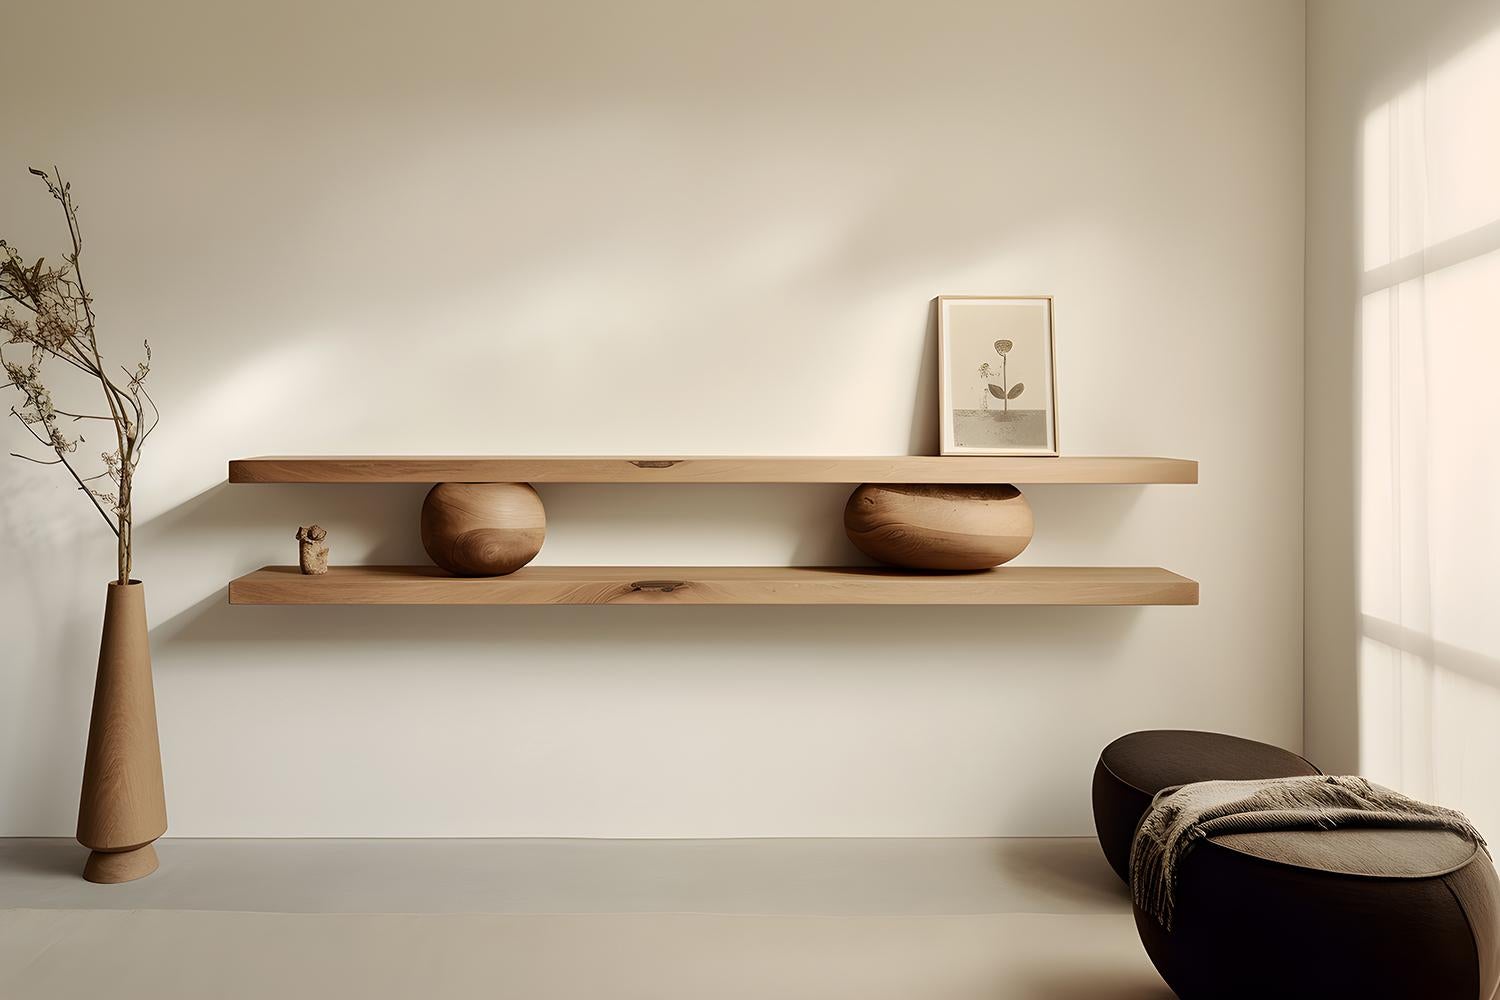 Set of Two Large Floating Shelves with Two Sculptural Wooden Pebble Accents in the Middle, Sereno by Joel Escalona

—

What happens when the practical becomes art?
What happens when ornamentation gains significance?

Those were the questions